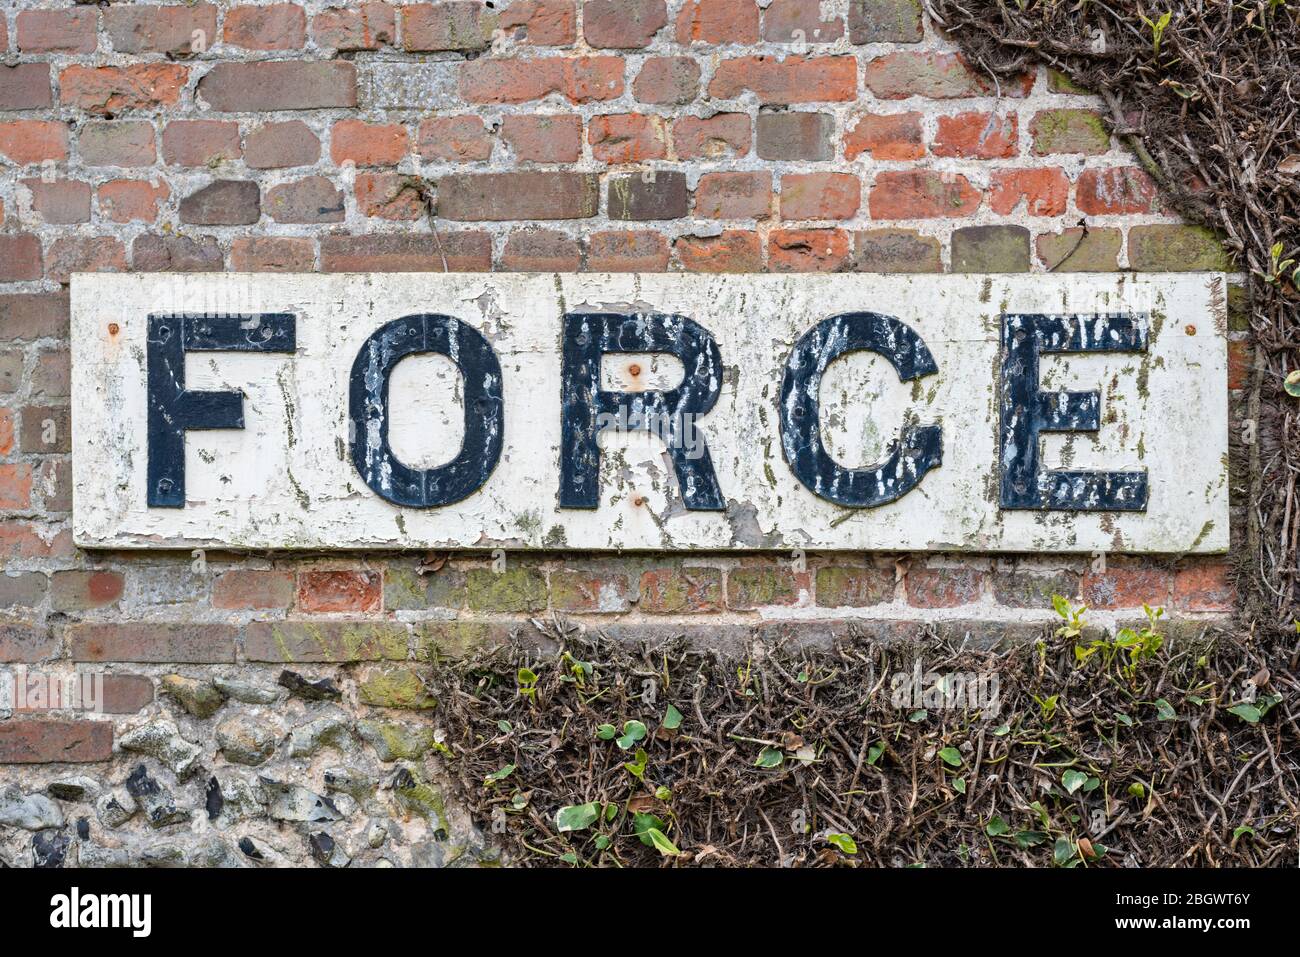 Forge sign on old brick and flint building. April, 2020 Stock Photo